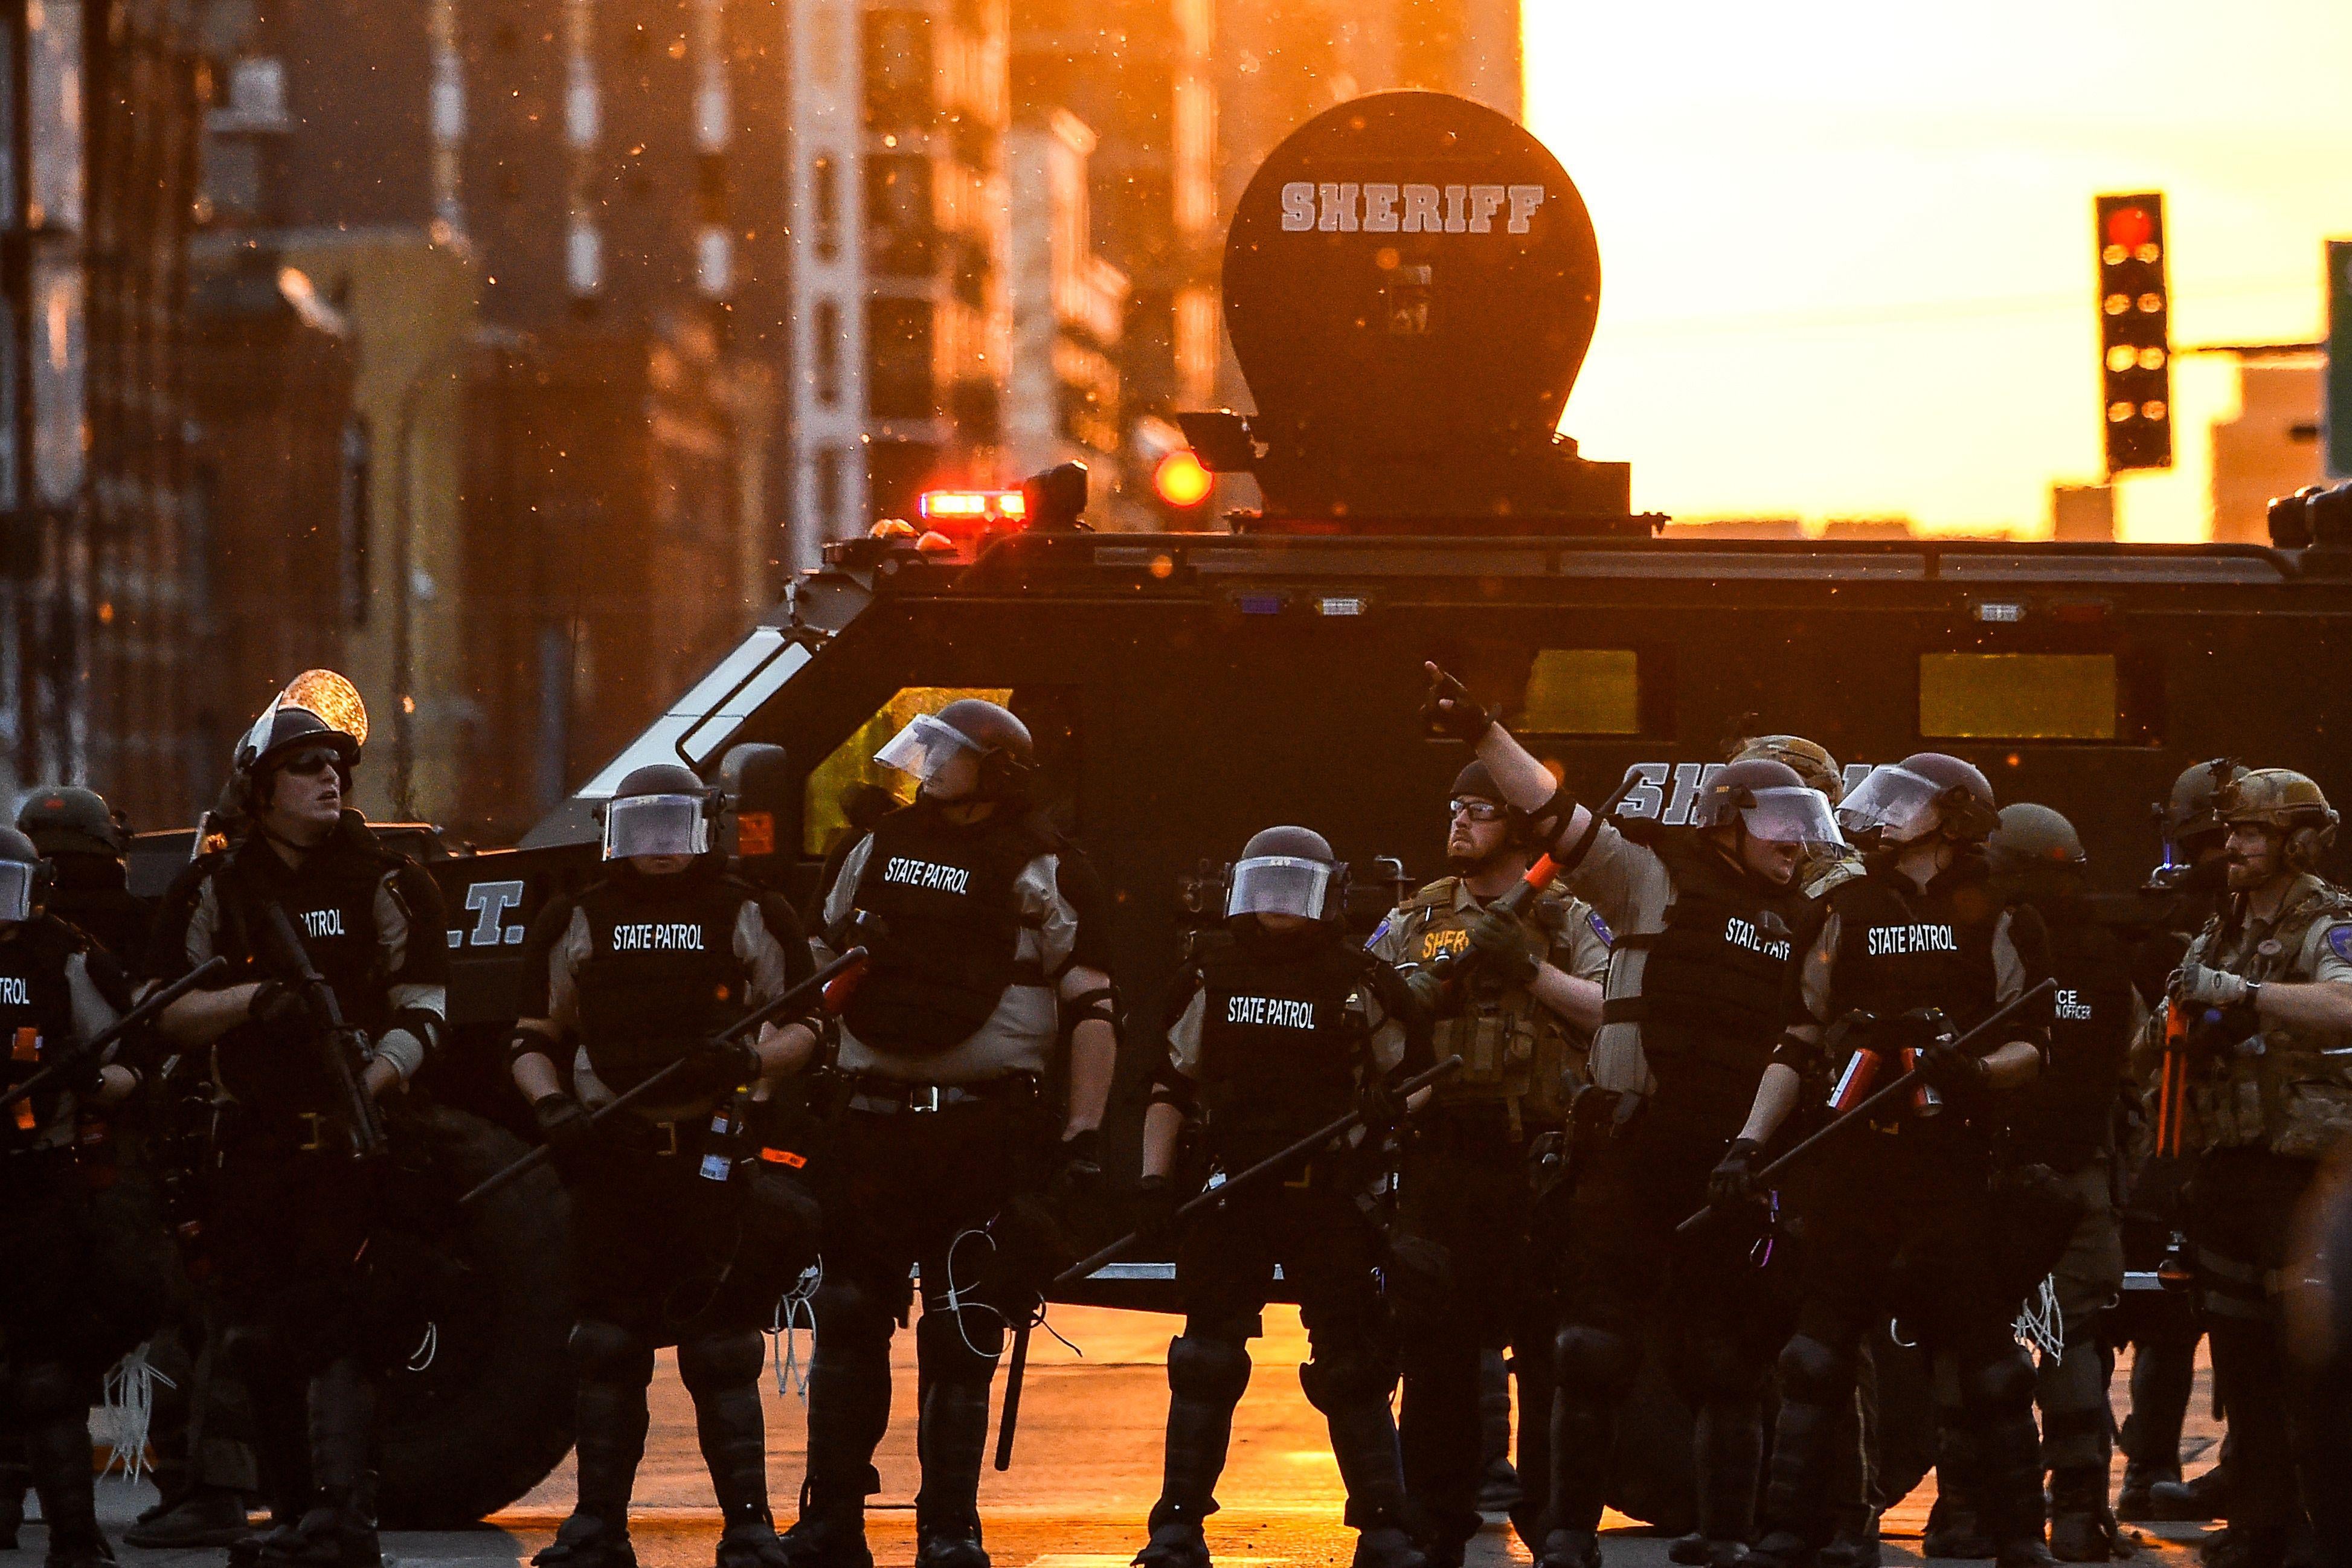 Officers with riot gear on stand in front of an armored vehicle at sunset.